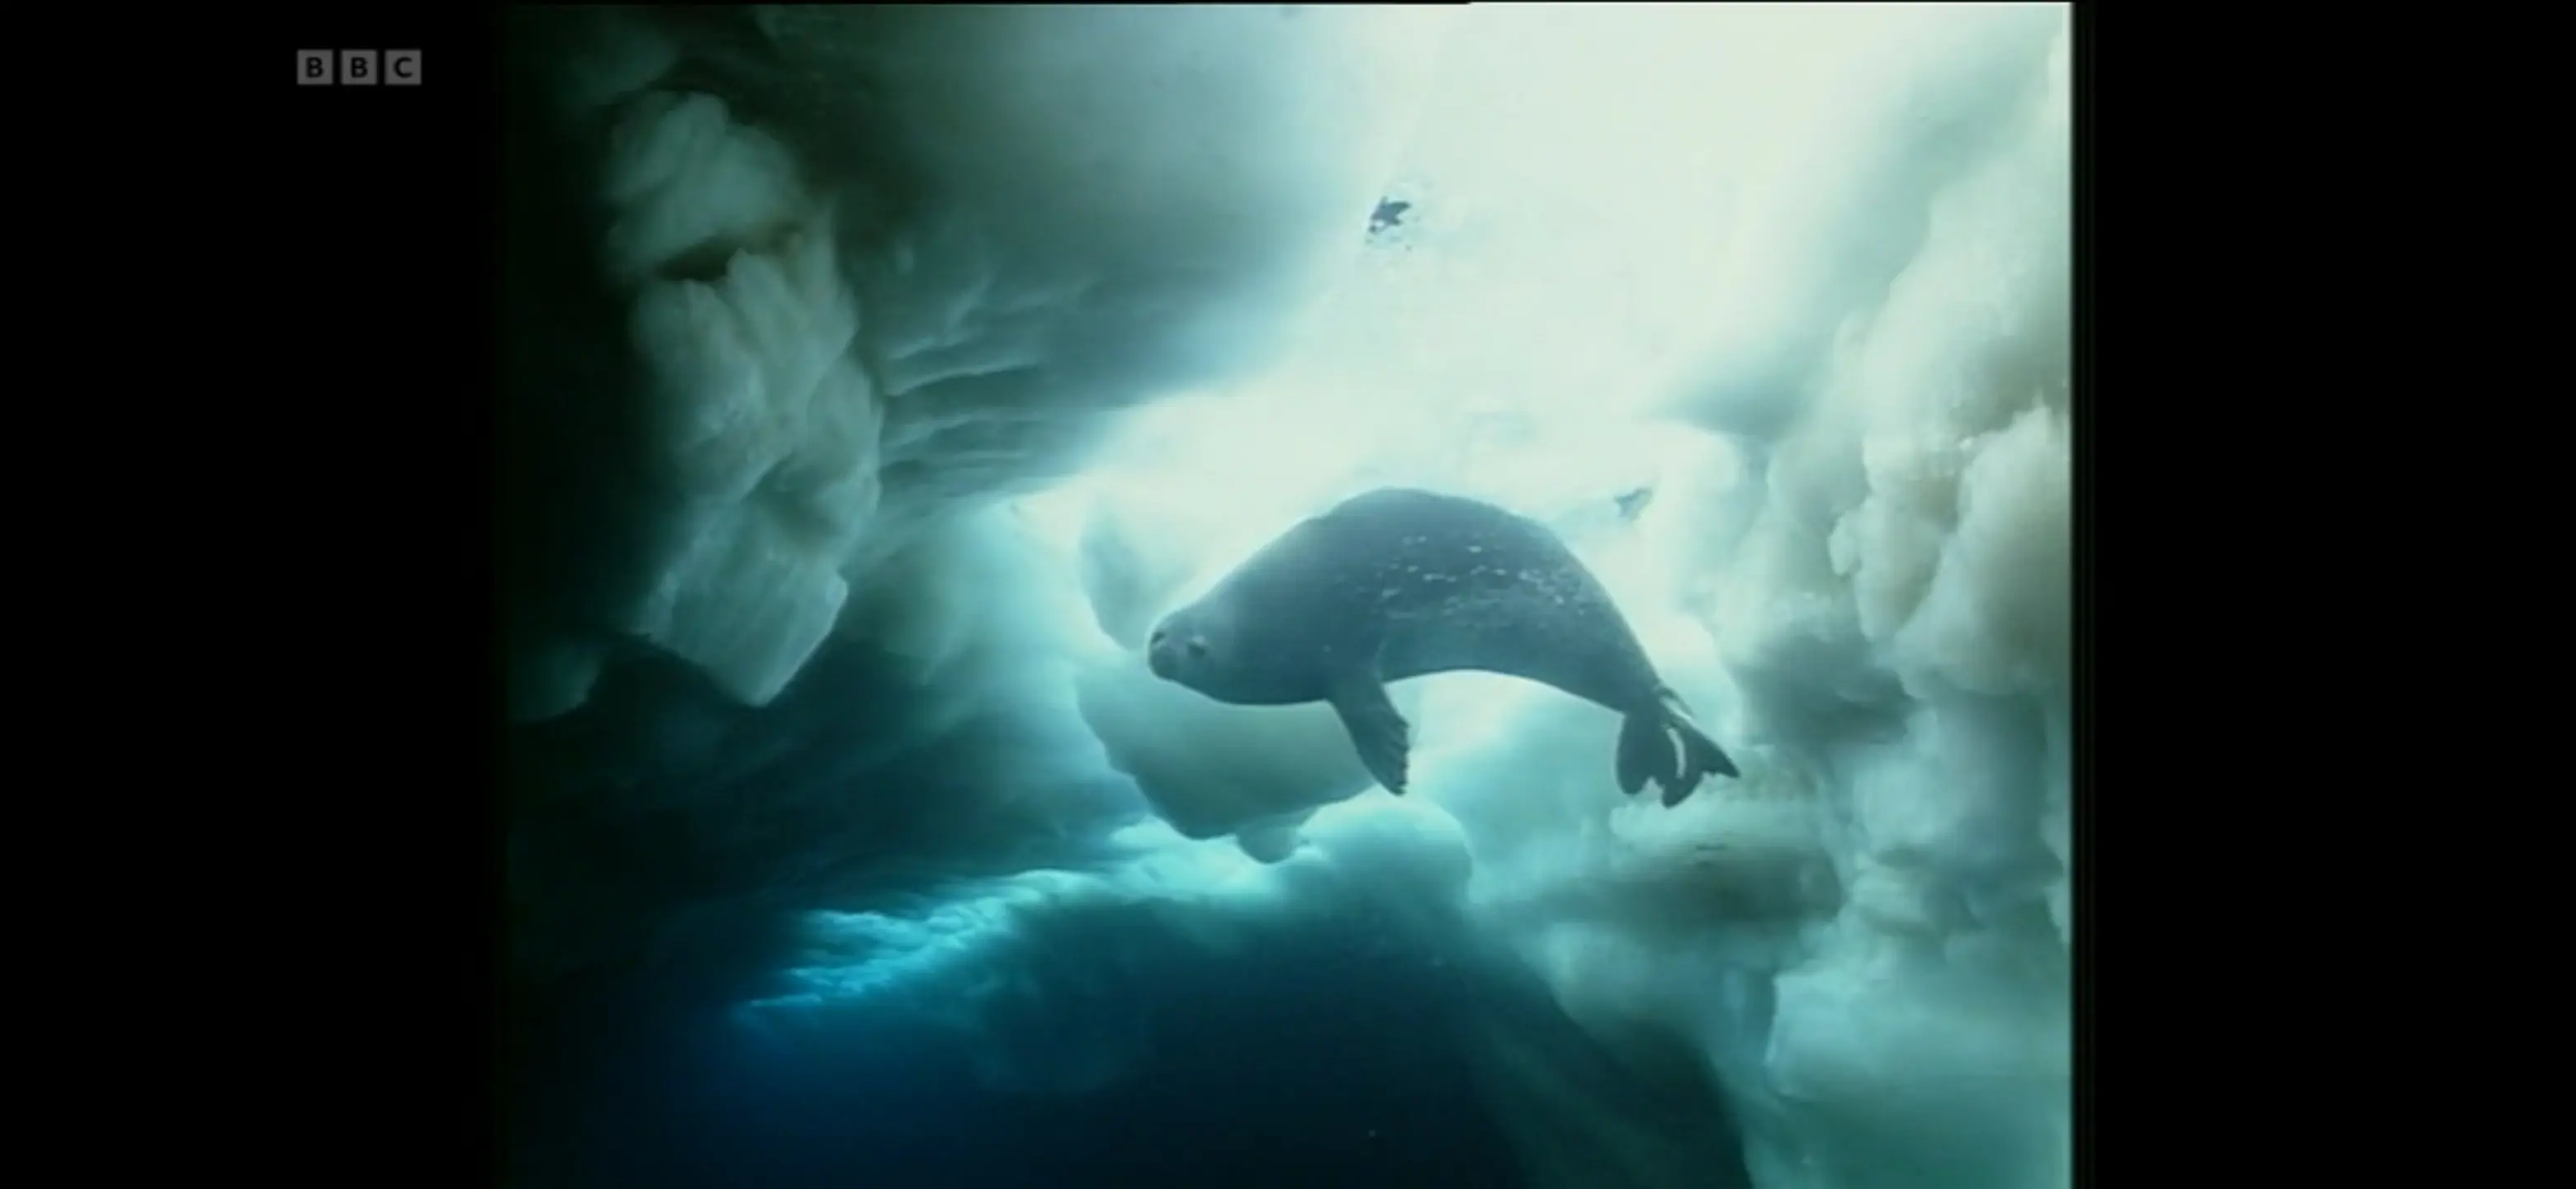 Weddell seal (Leptonychotes weddellii) as shown in Life in the Freezer - The Big Freeze